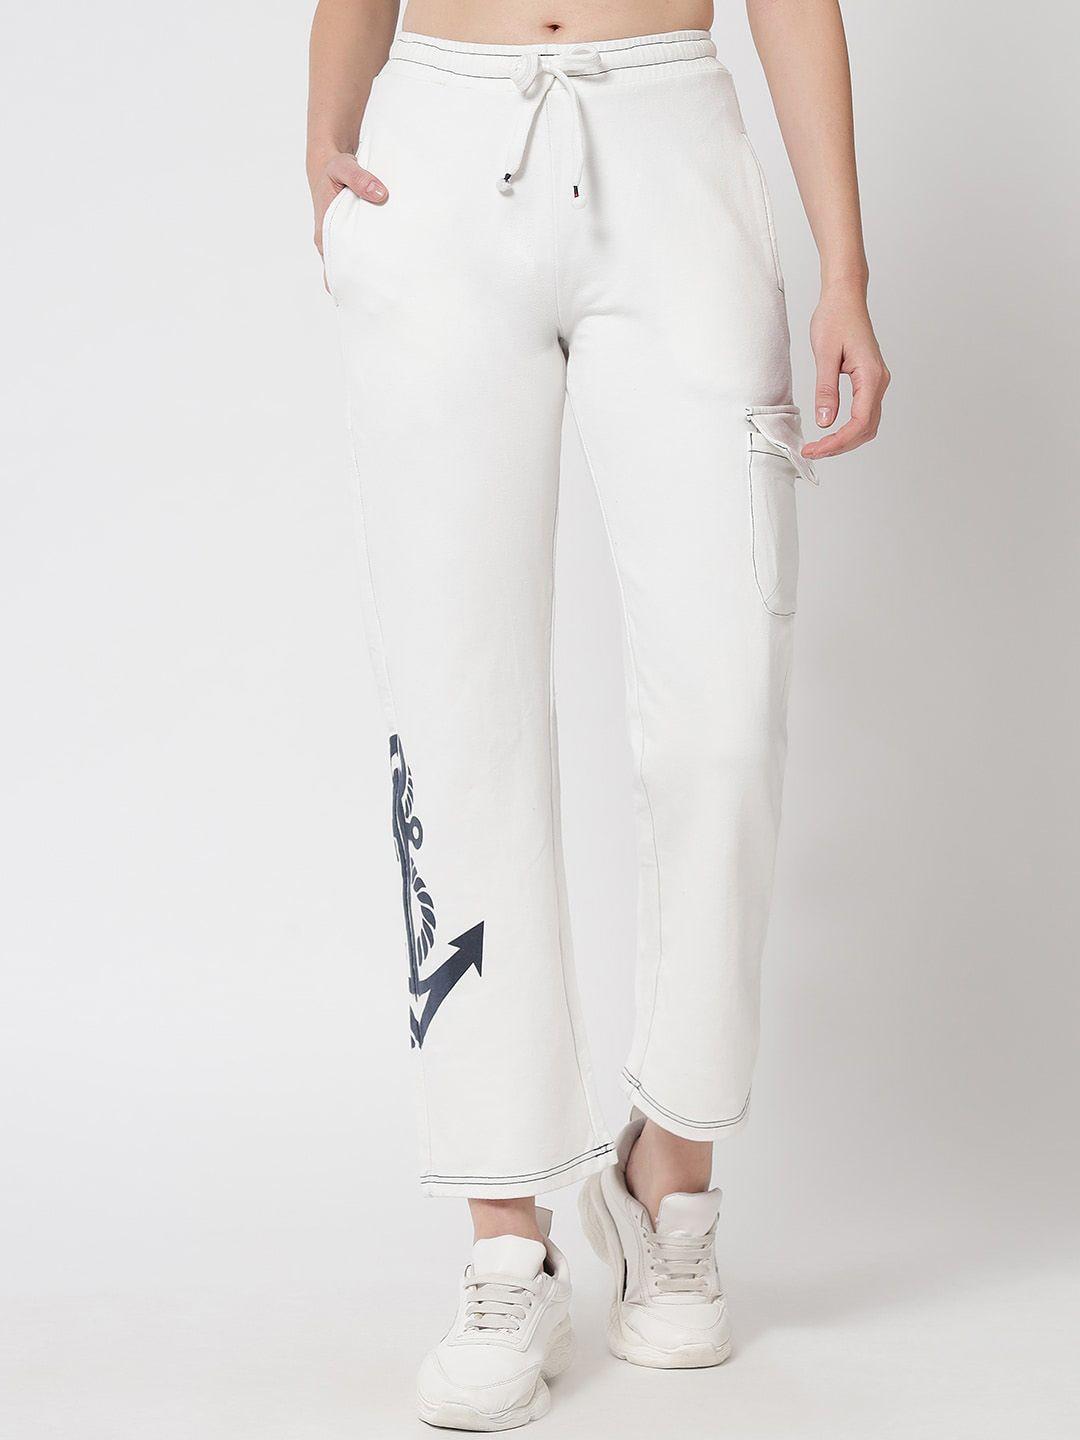 river-of-design-jeans-women-white-printed-cotton-track-pants